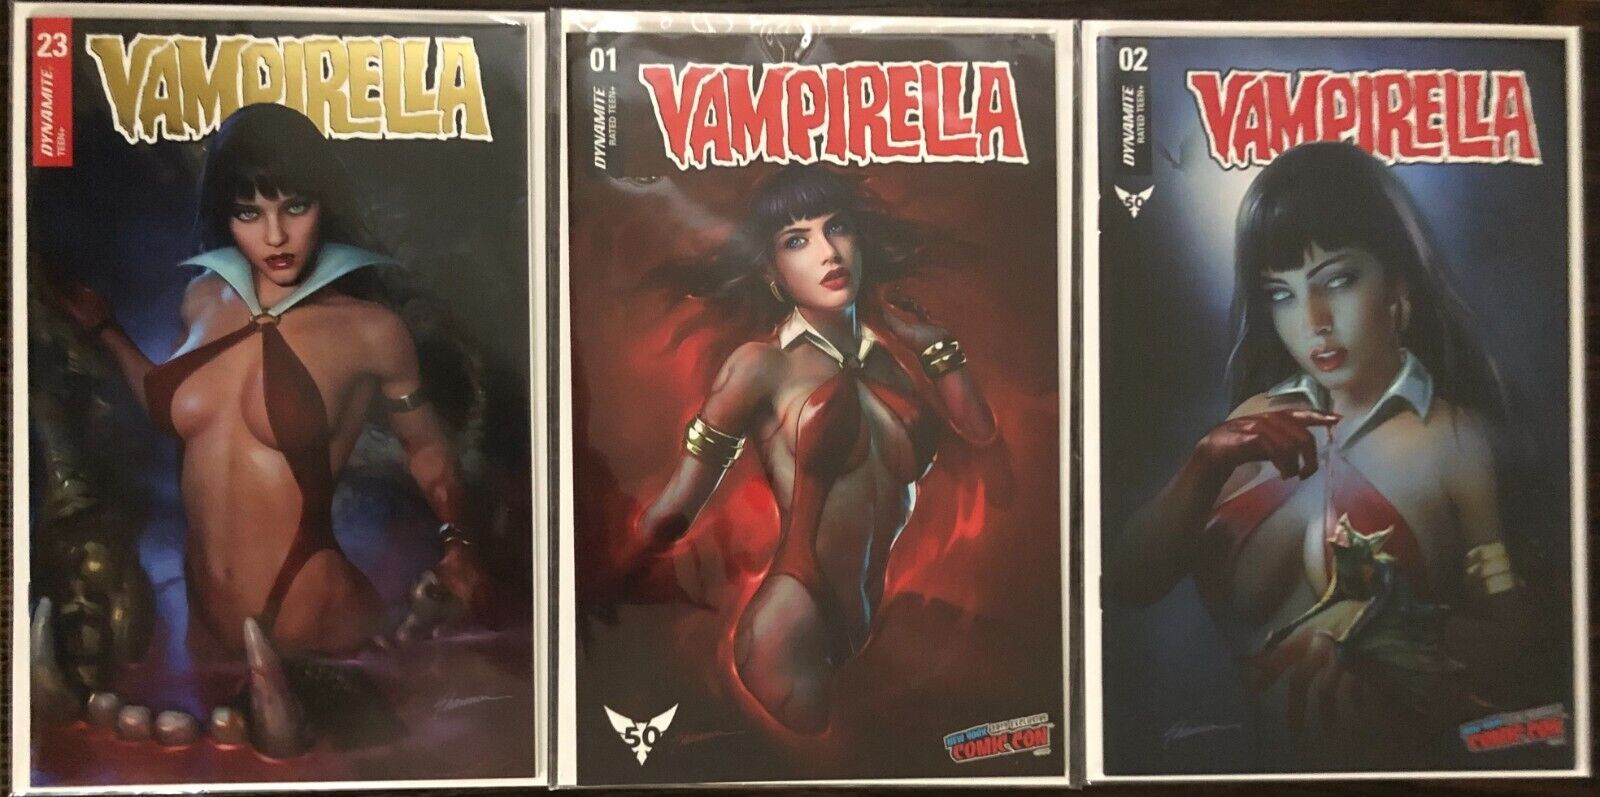 HOLIDAY BLOWOUT SALE VAMPIRELLA #23 Shannon Gold Foil Exclusive ALL NM+